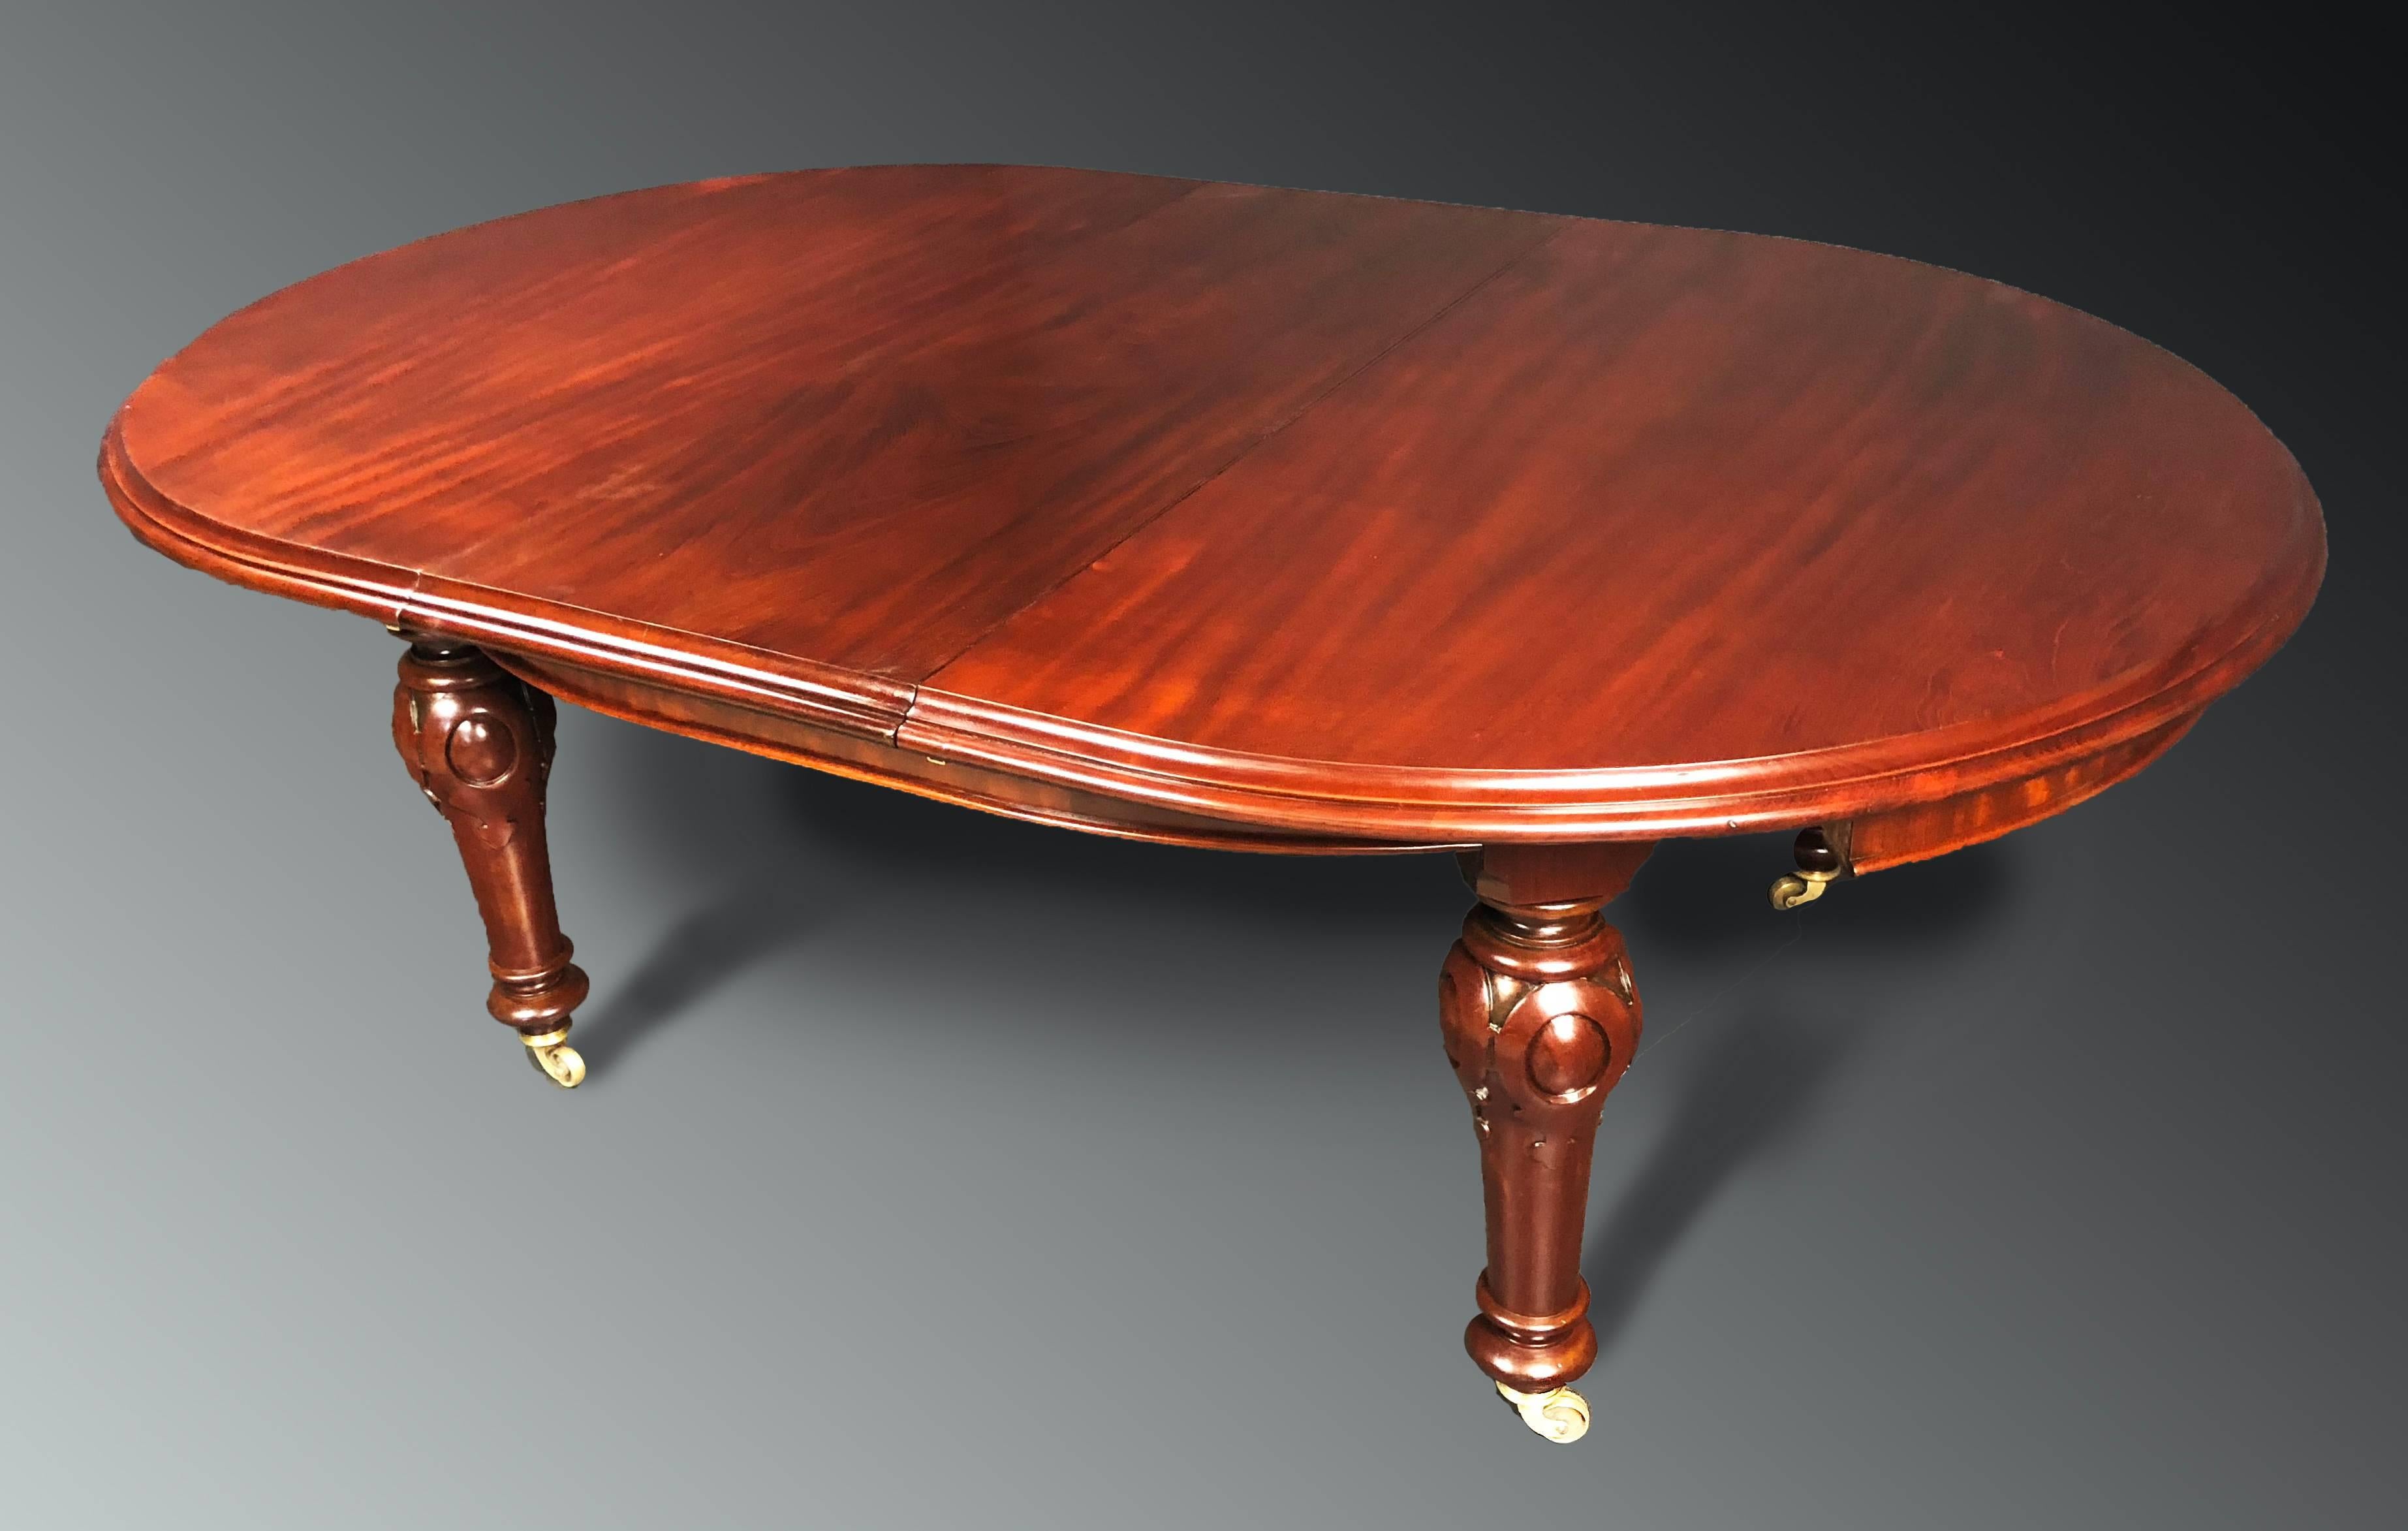 English Large Dining Table Victorian Era with Easy Extension System Solid Mahogany